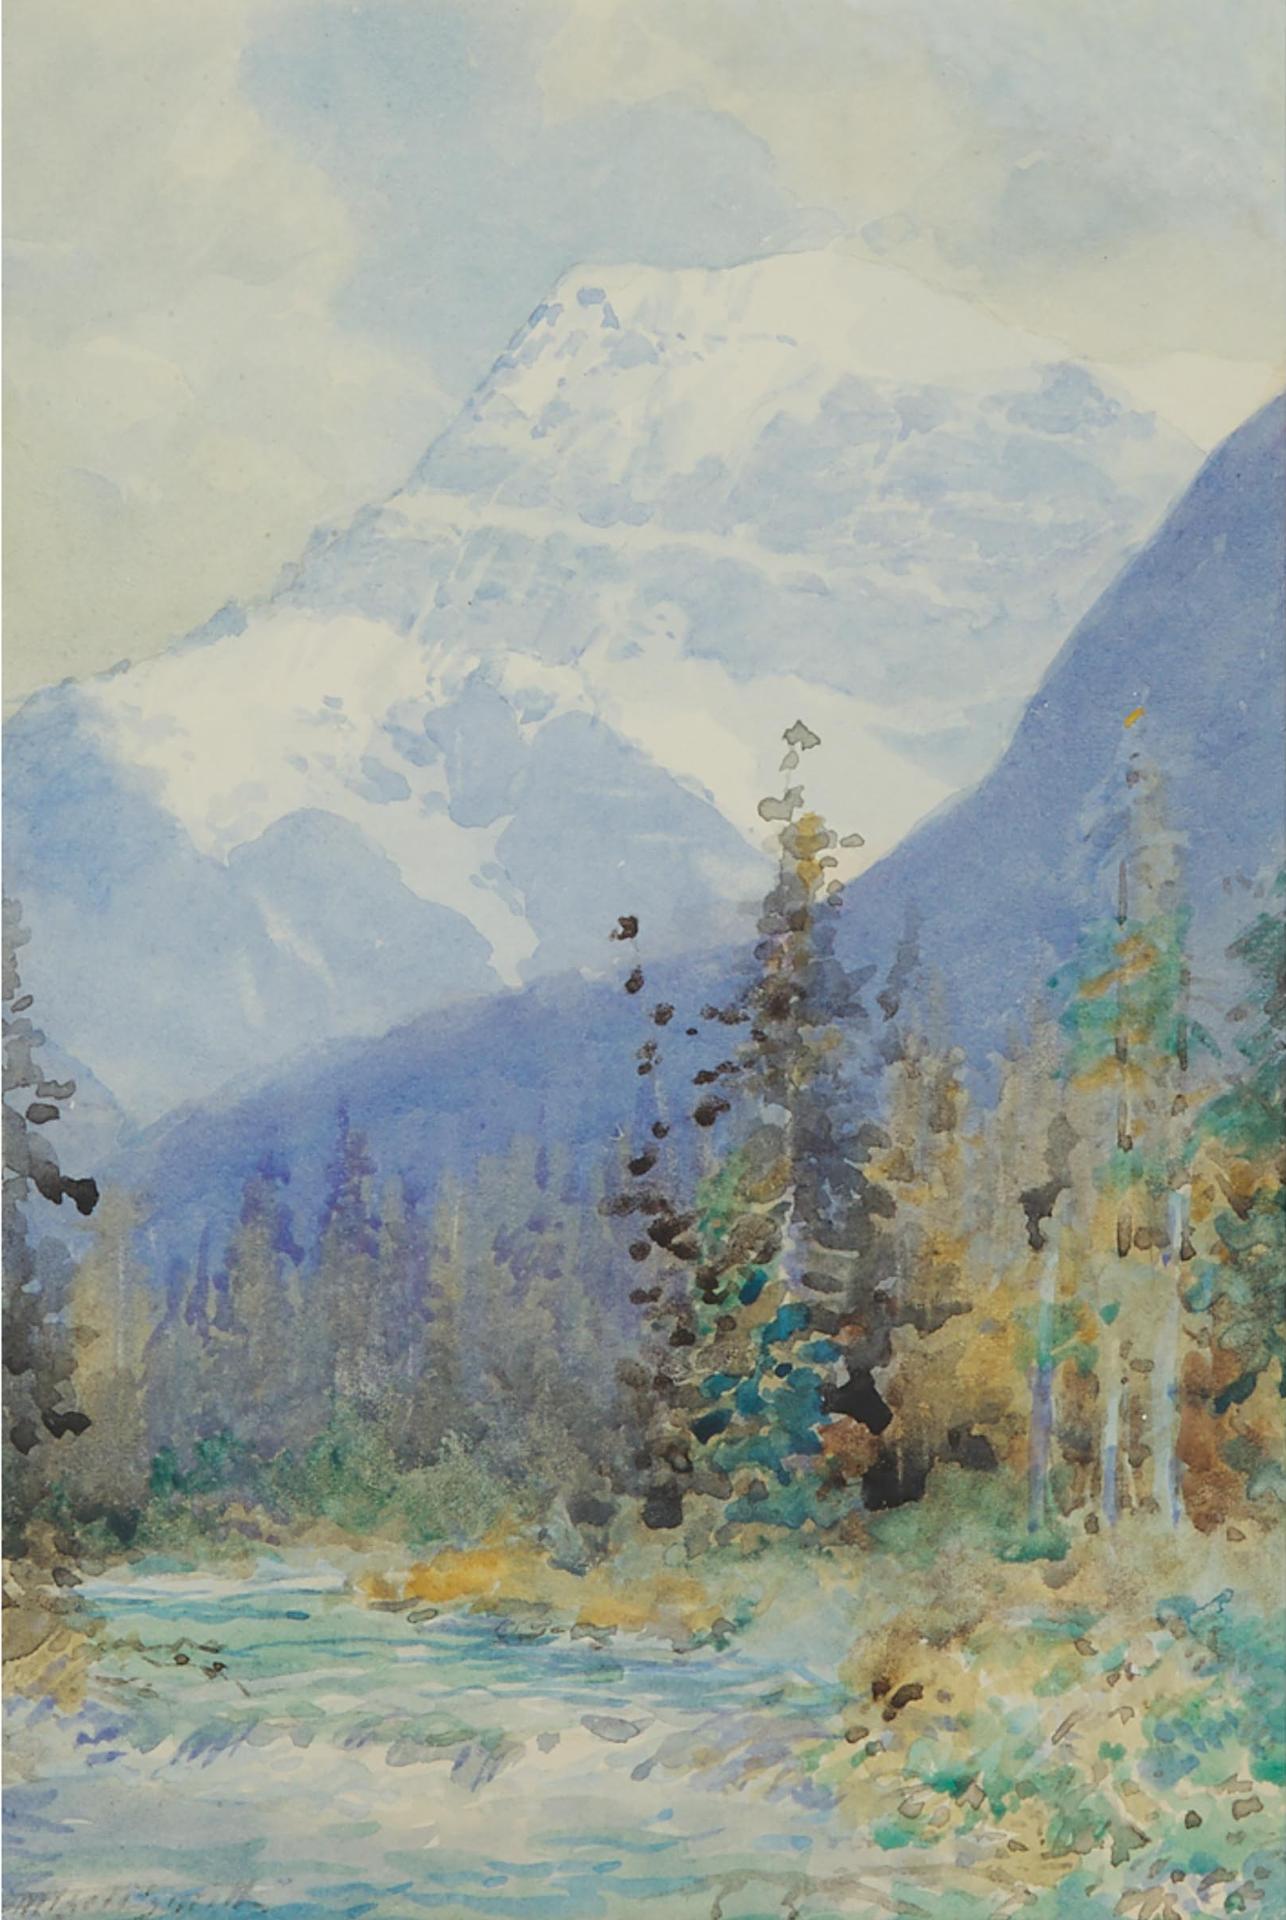 Frederic Martlett Bell-Smith (1846-1923) - Mount Edith Cavell